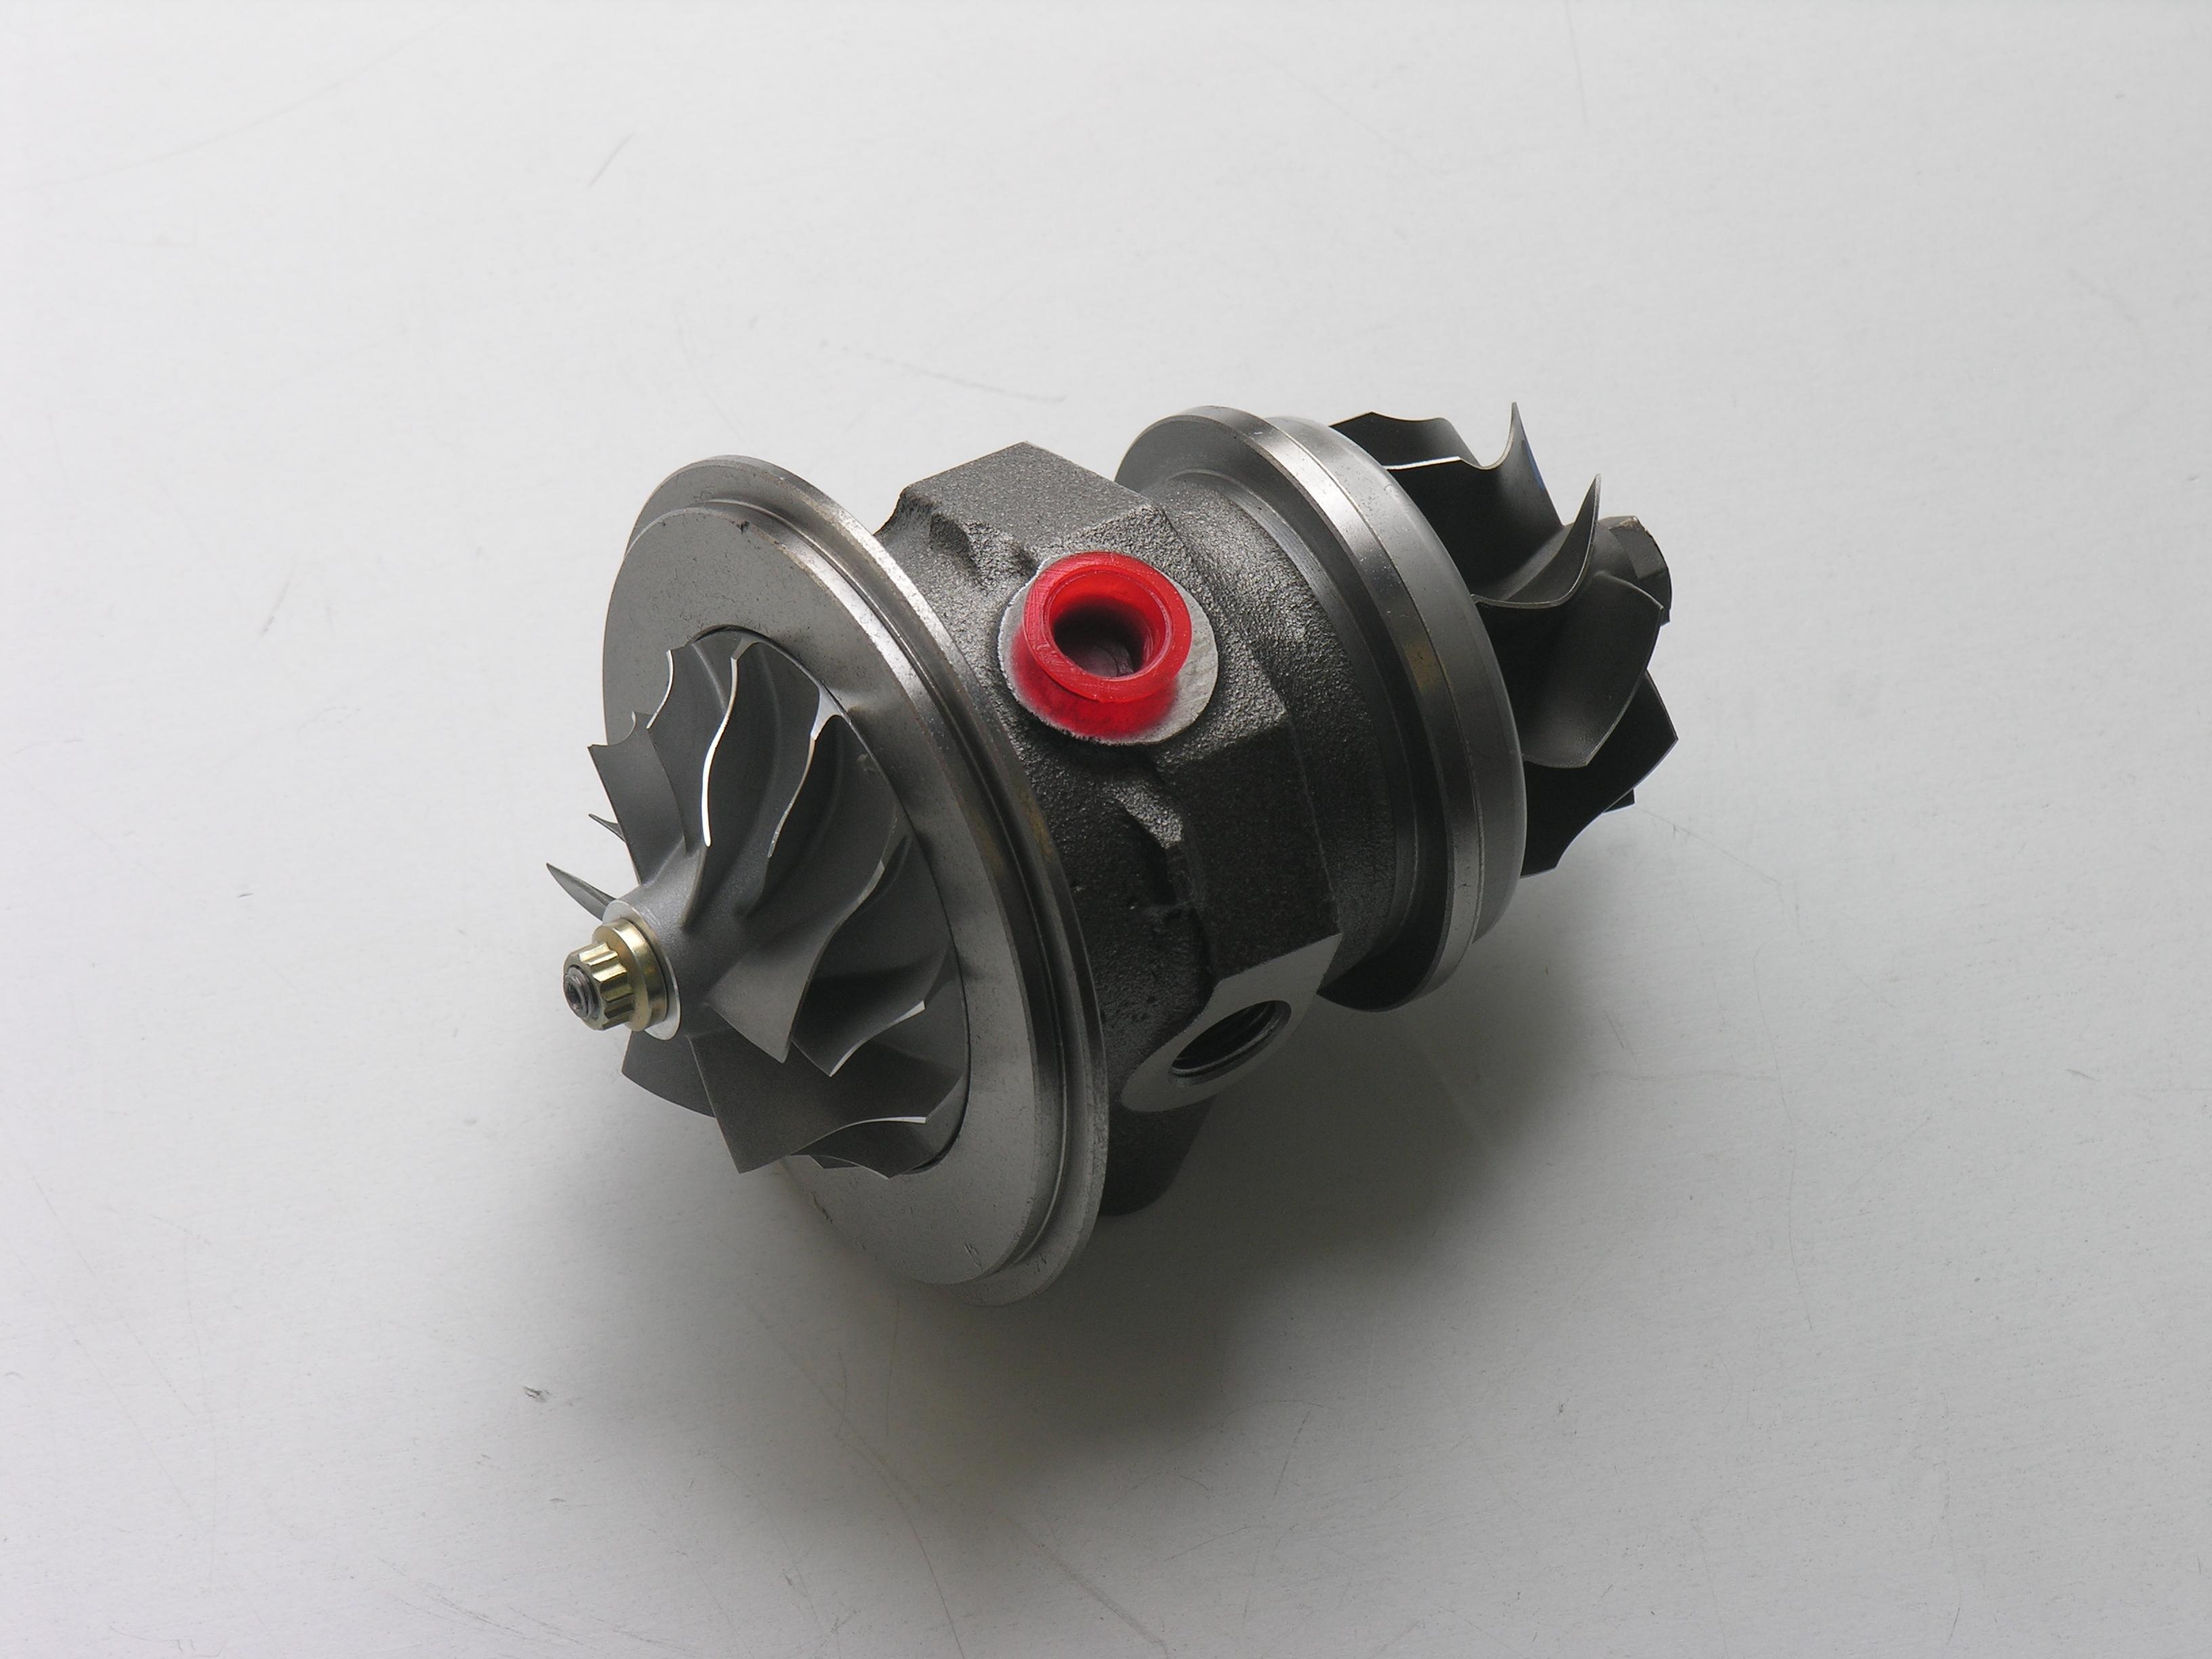 Cartridge for turbo charger db3CG2C